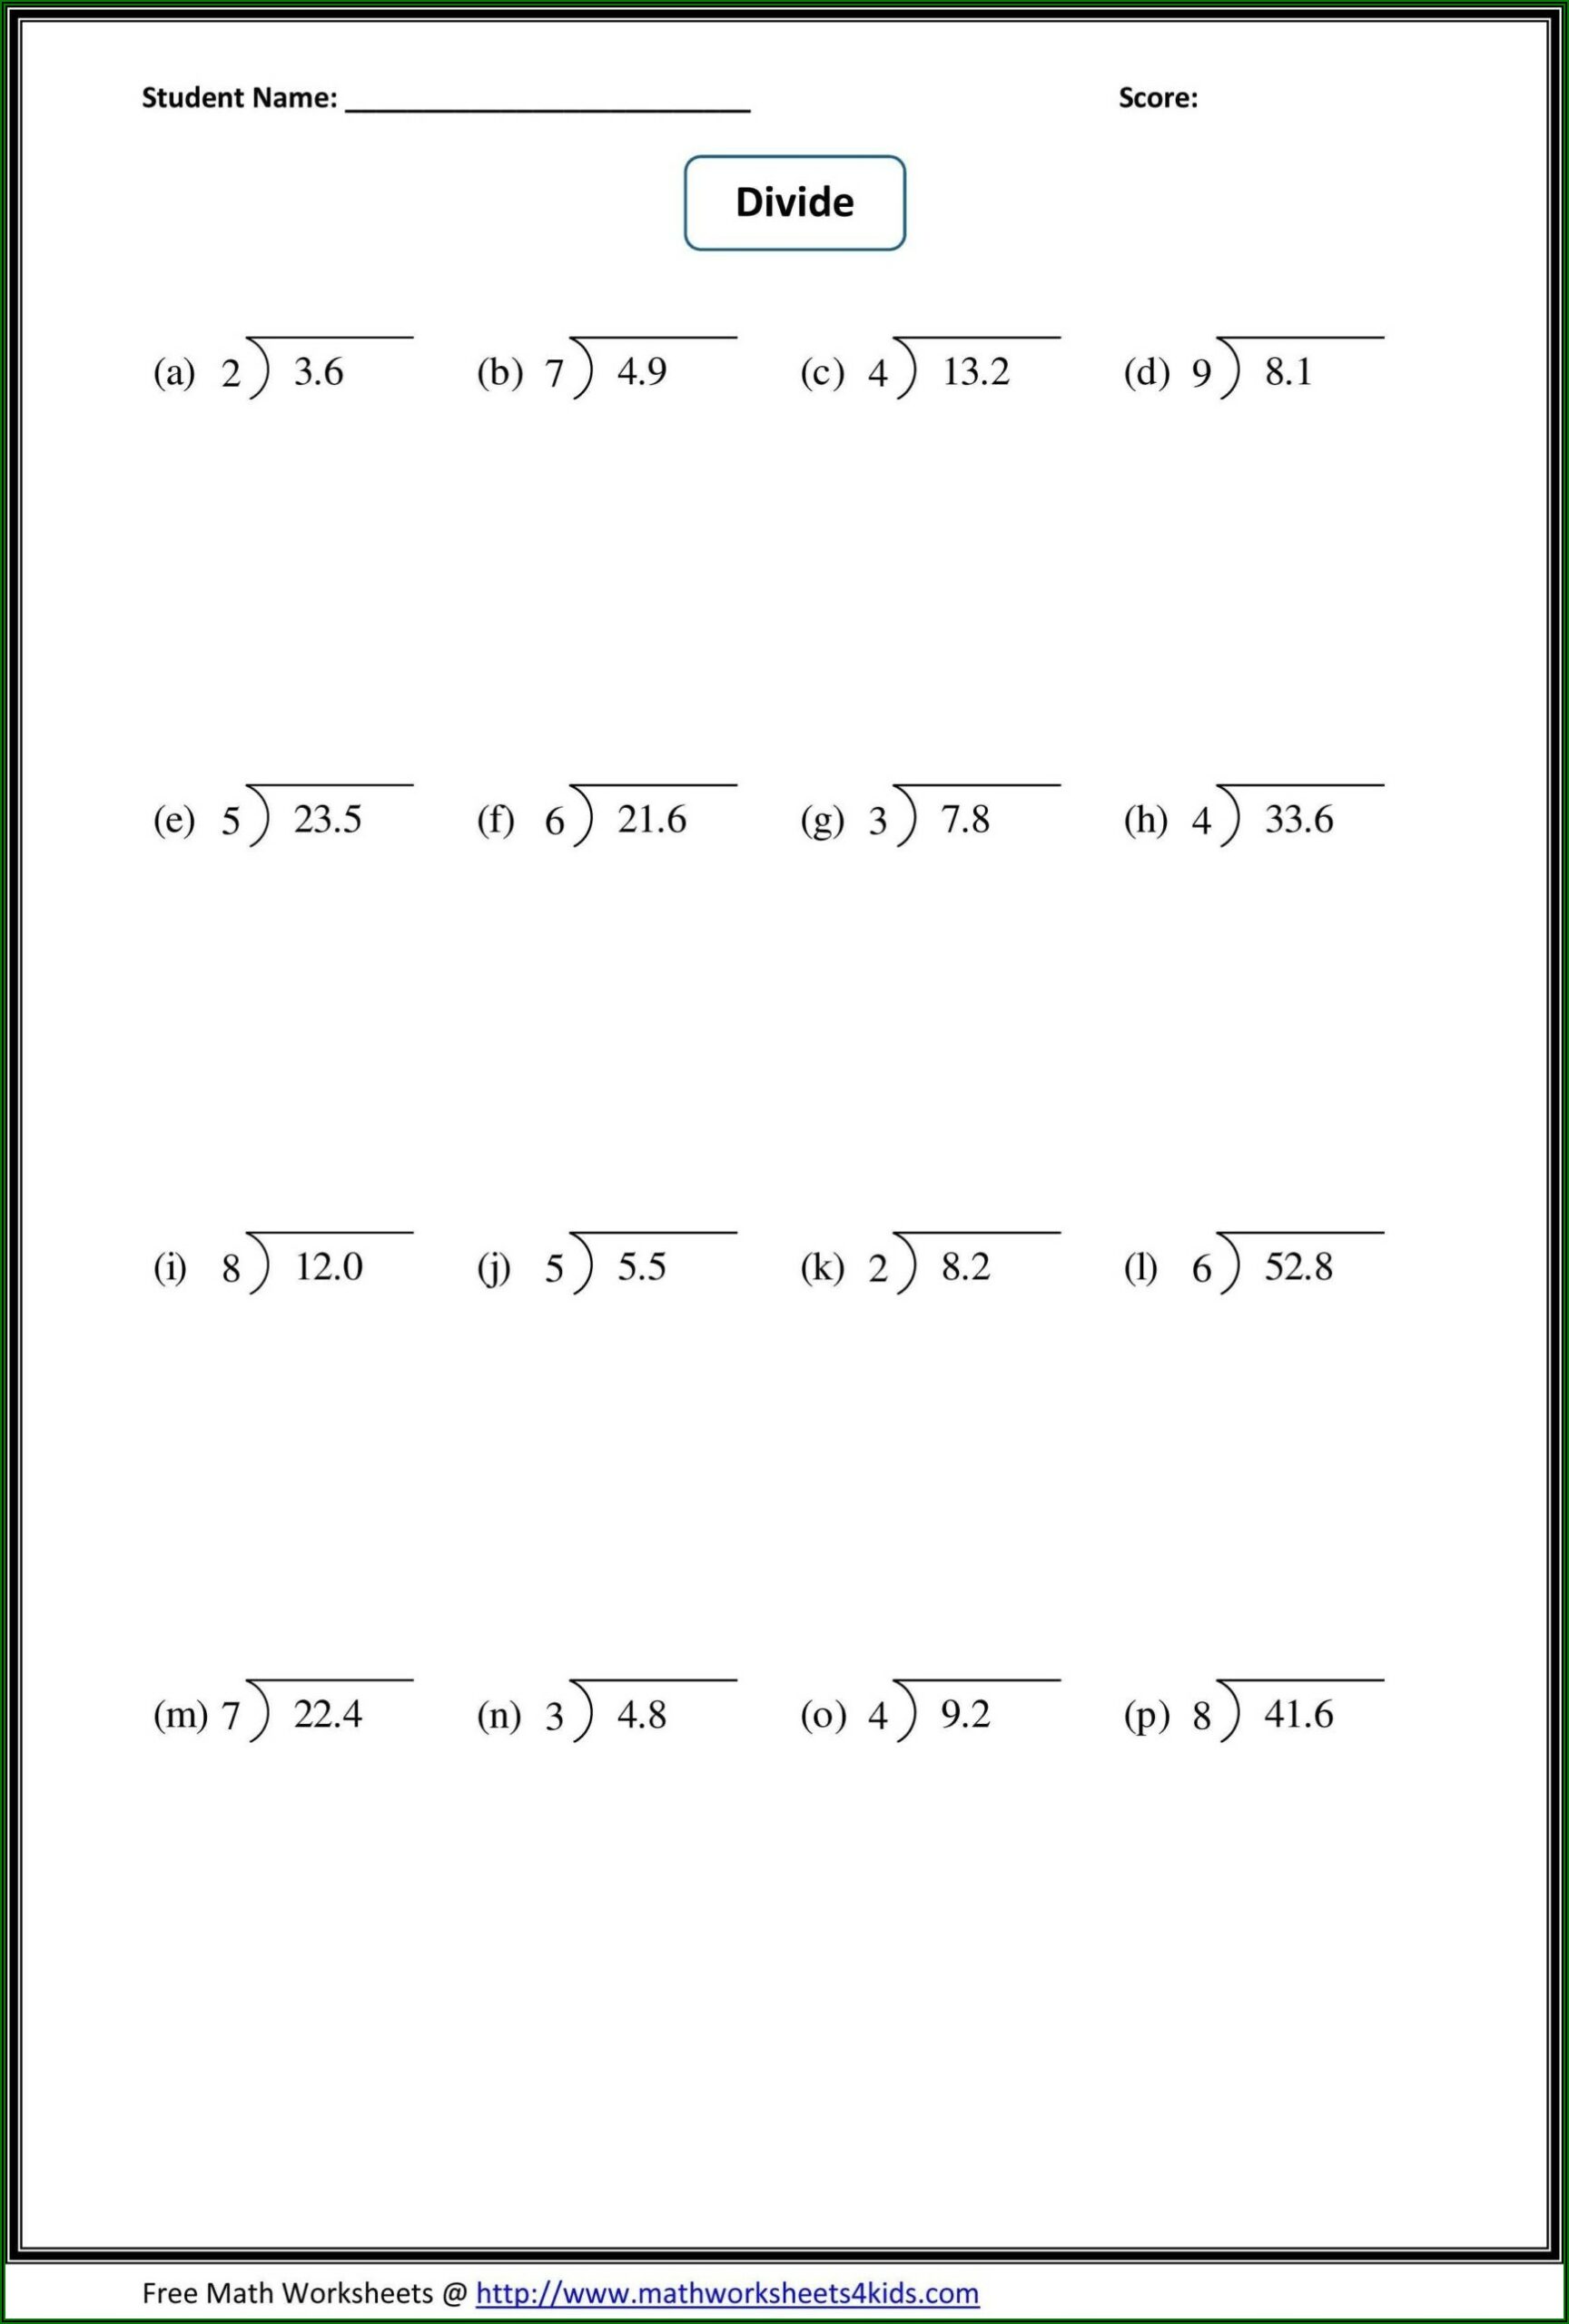 Dividing Decimals By Whole Numbers Word Problems Worksheet Pdf